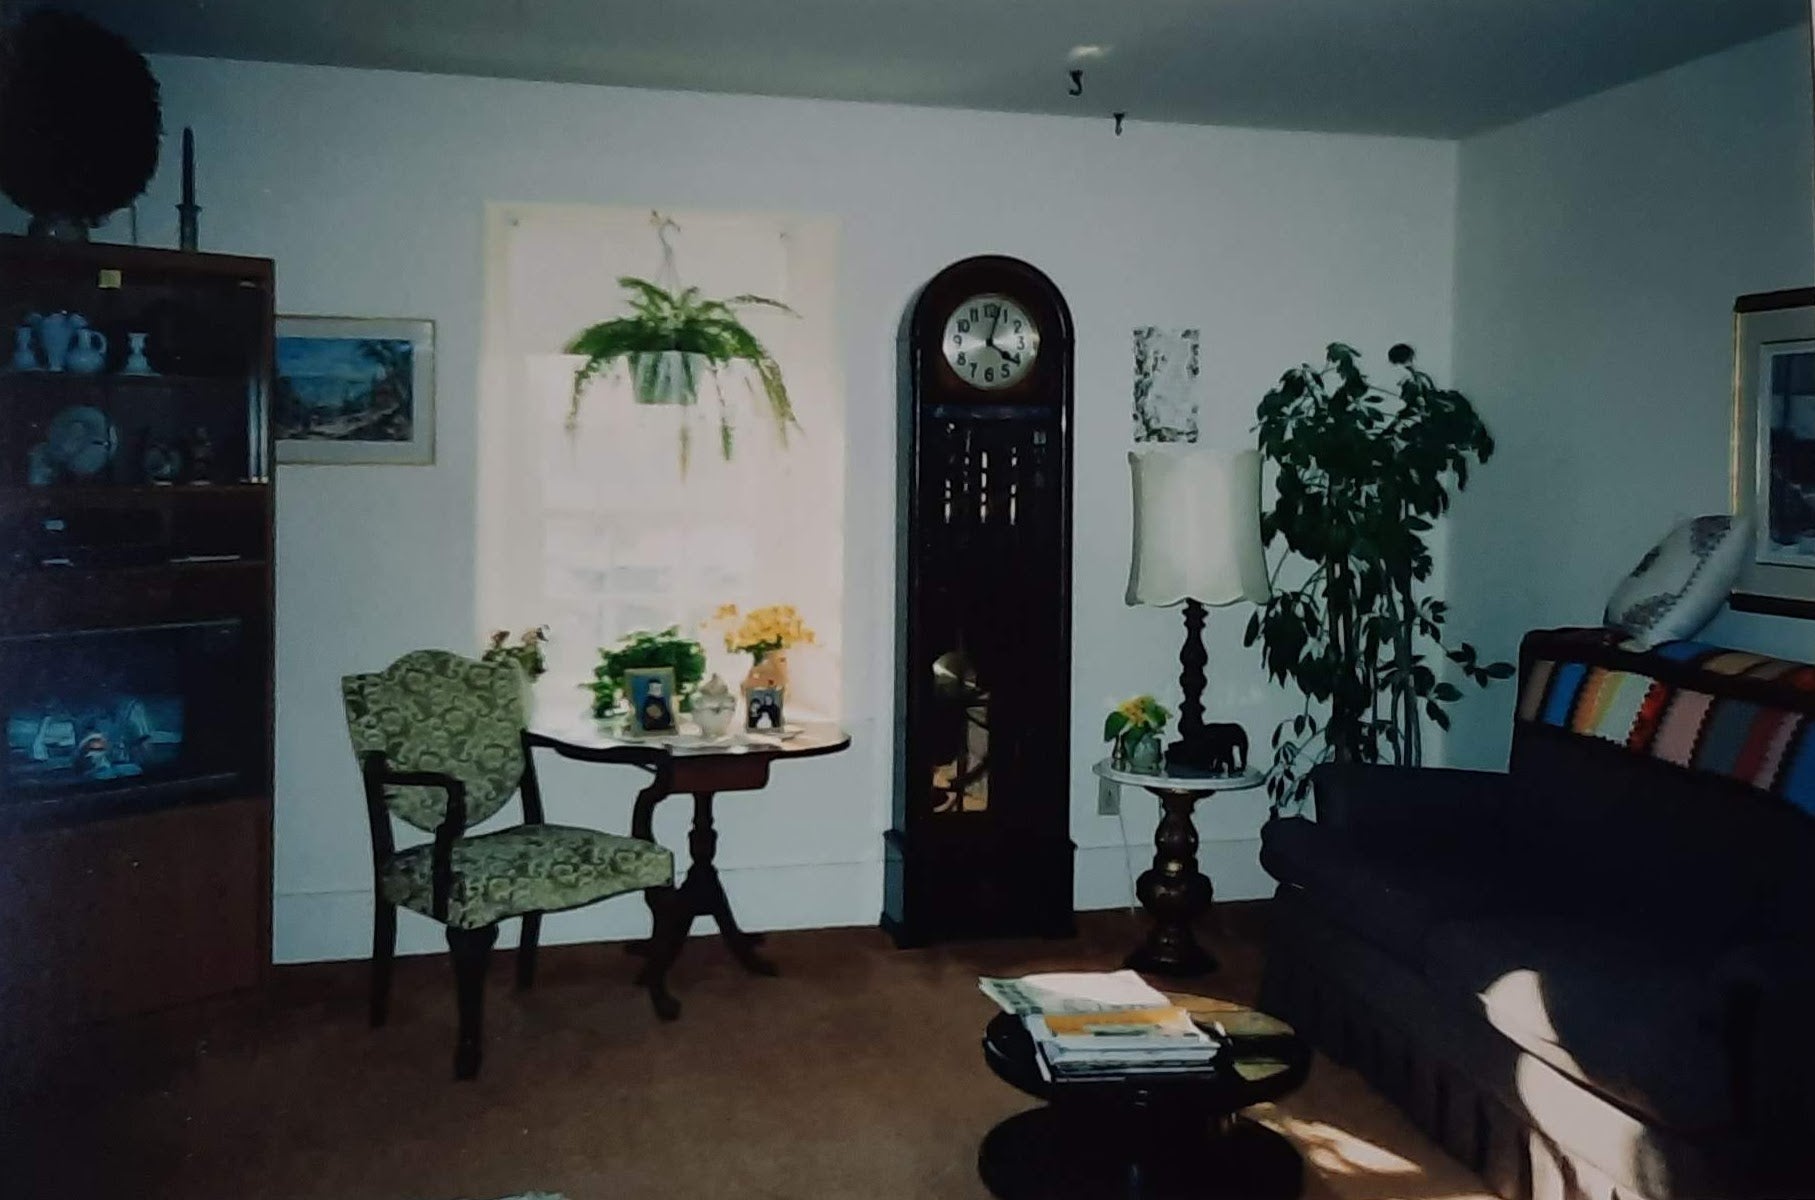 an old photo of the corner of a living room, a large standing clock stands prominently in the room.